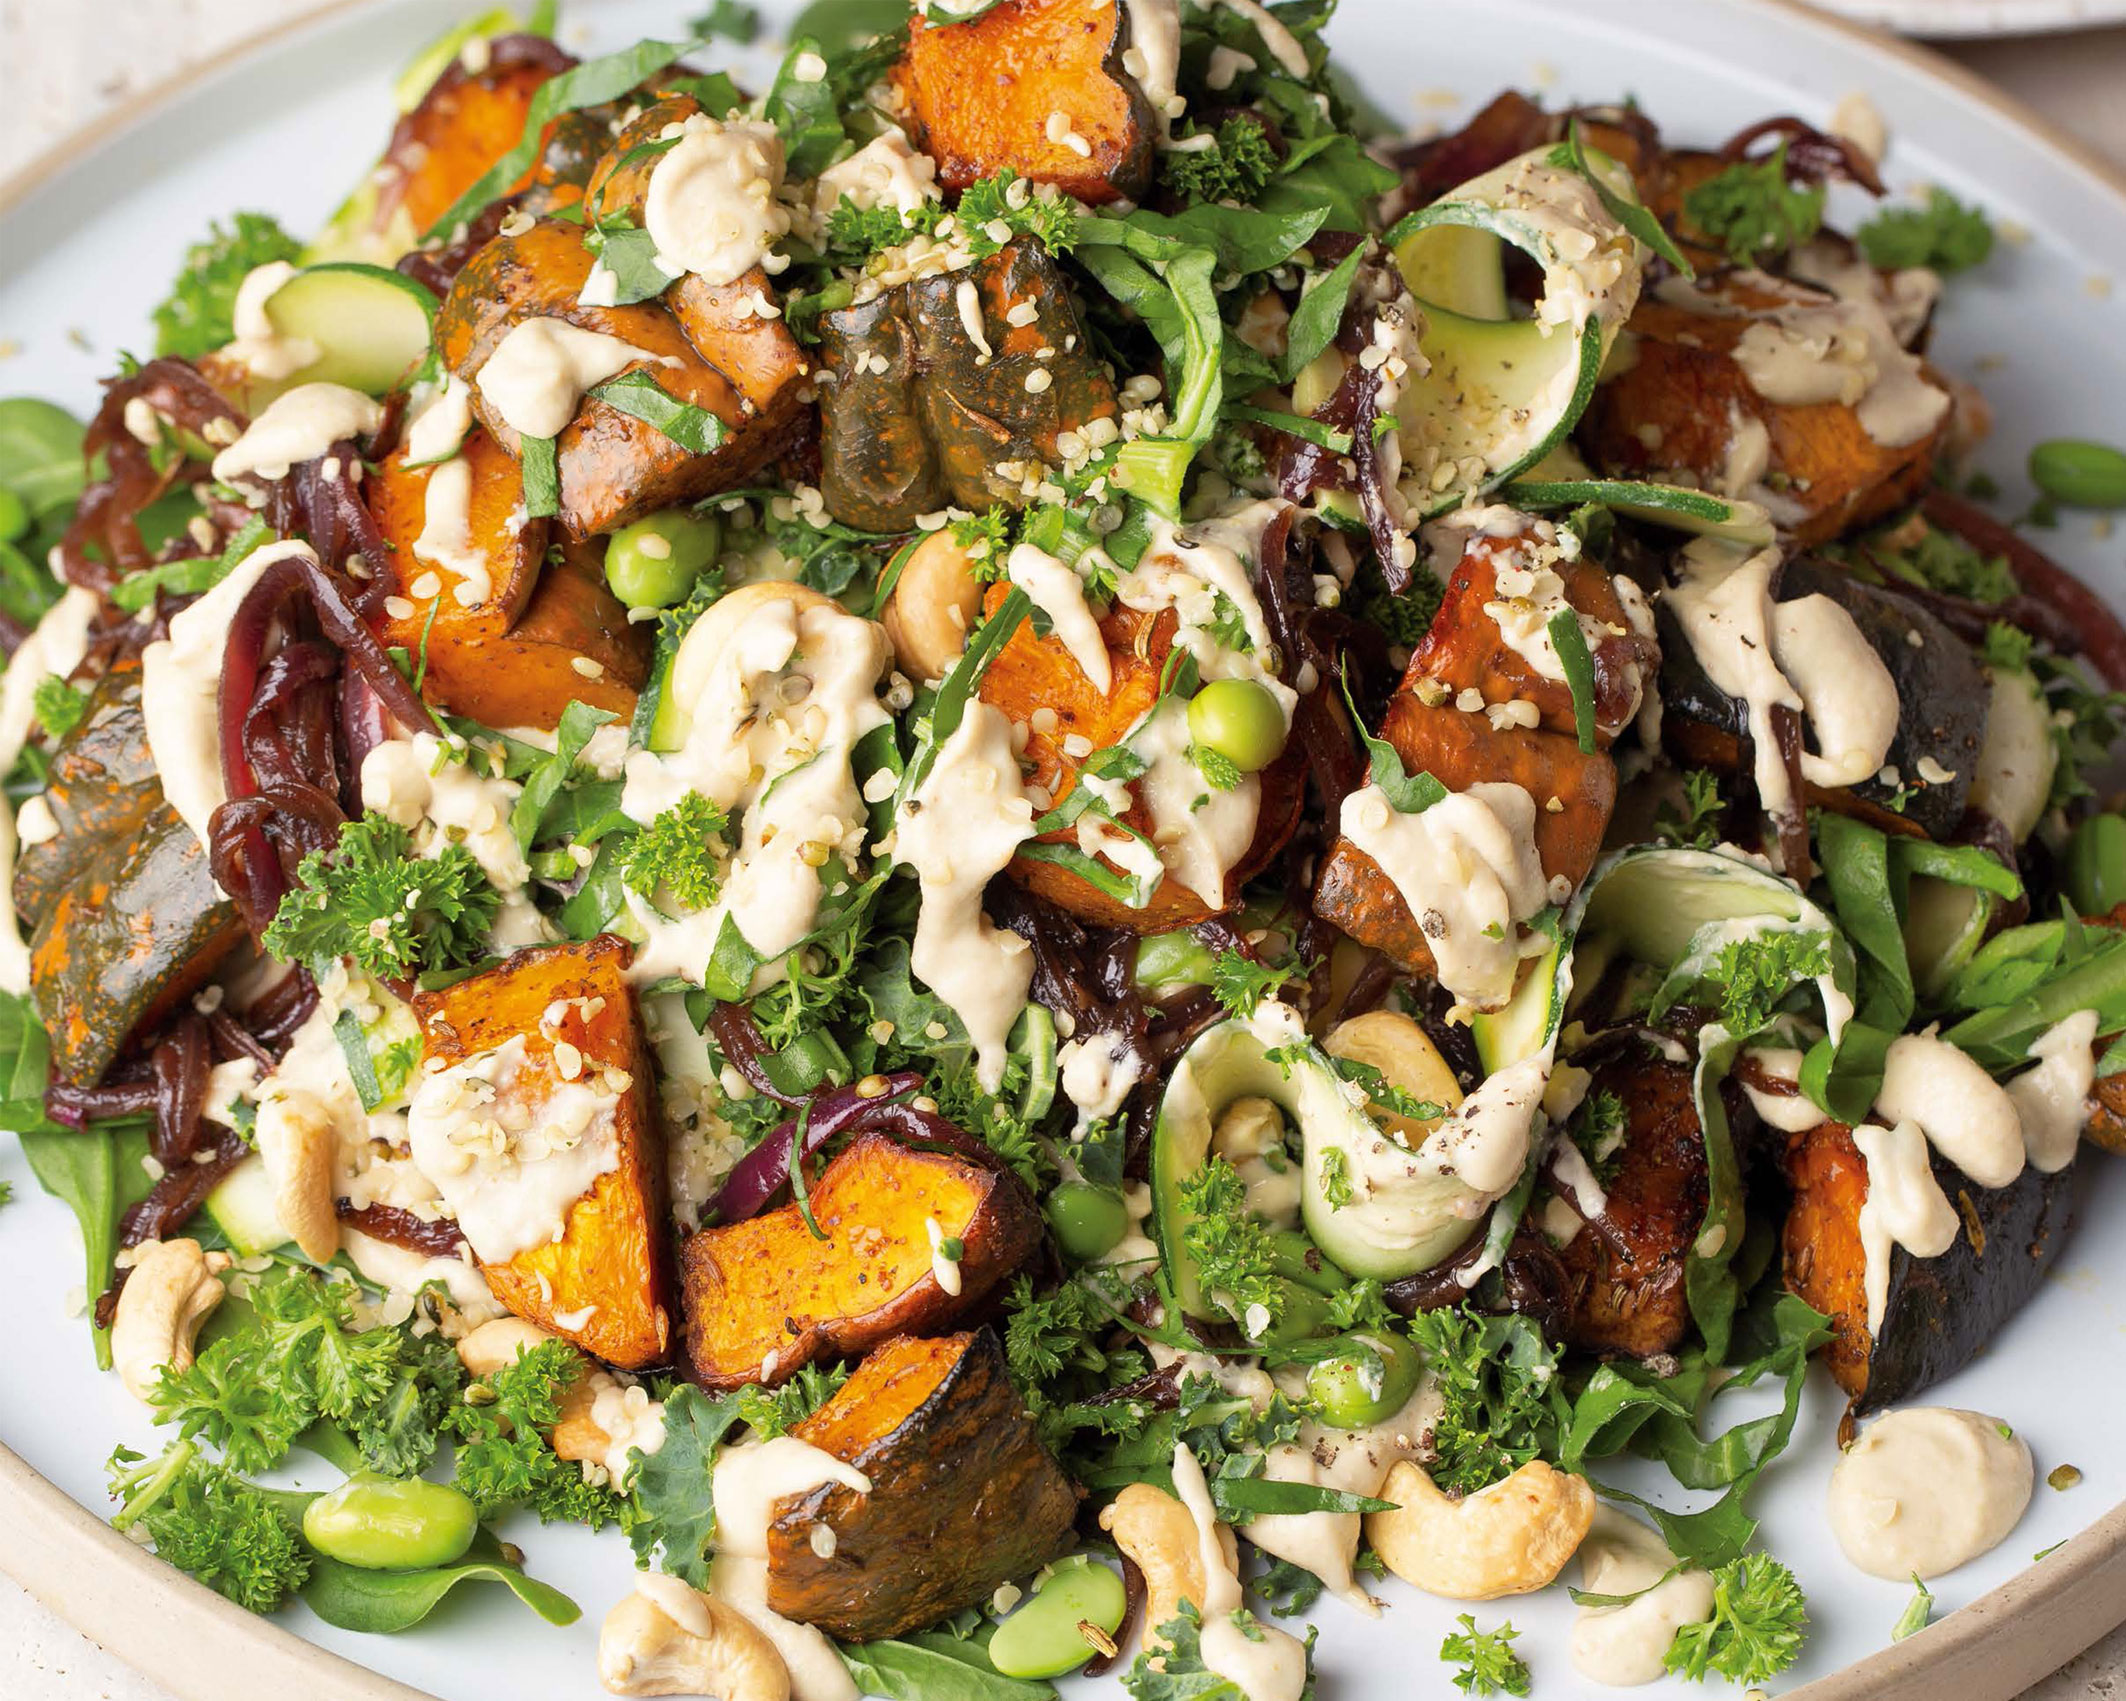 Sumac Pumpkin, Caramelised Onion and Greens with Garlic Dressing by Sophie Steevens